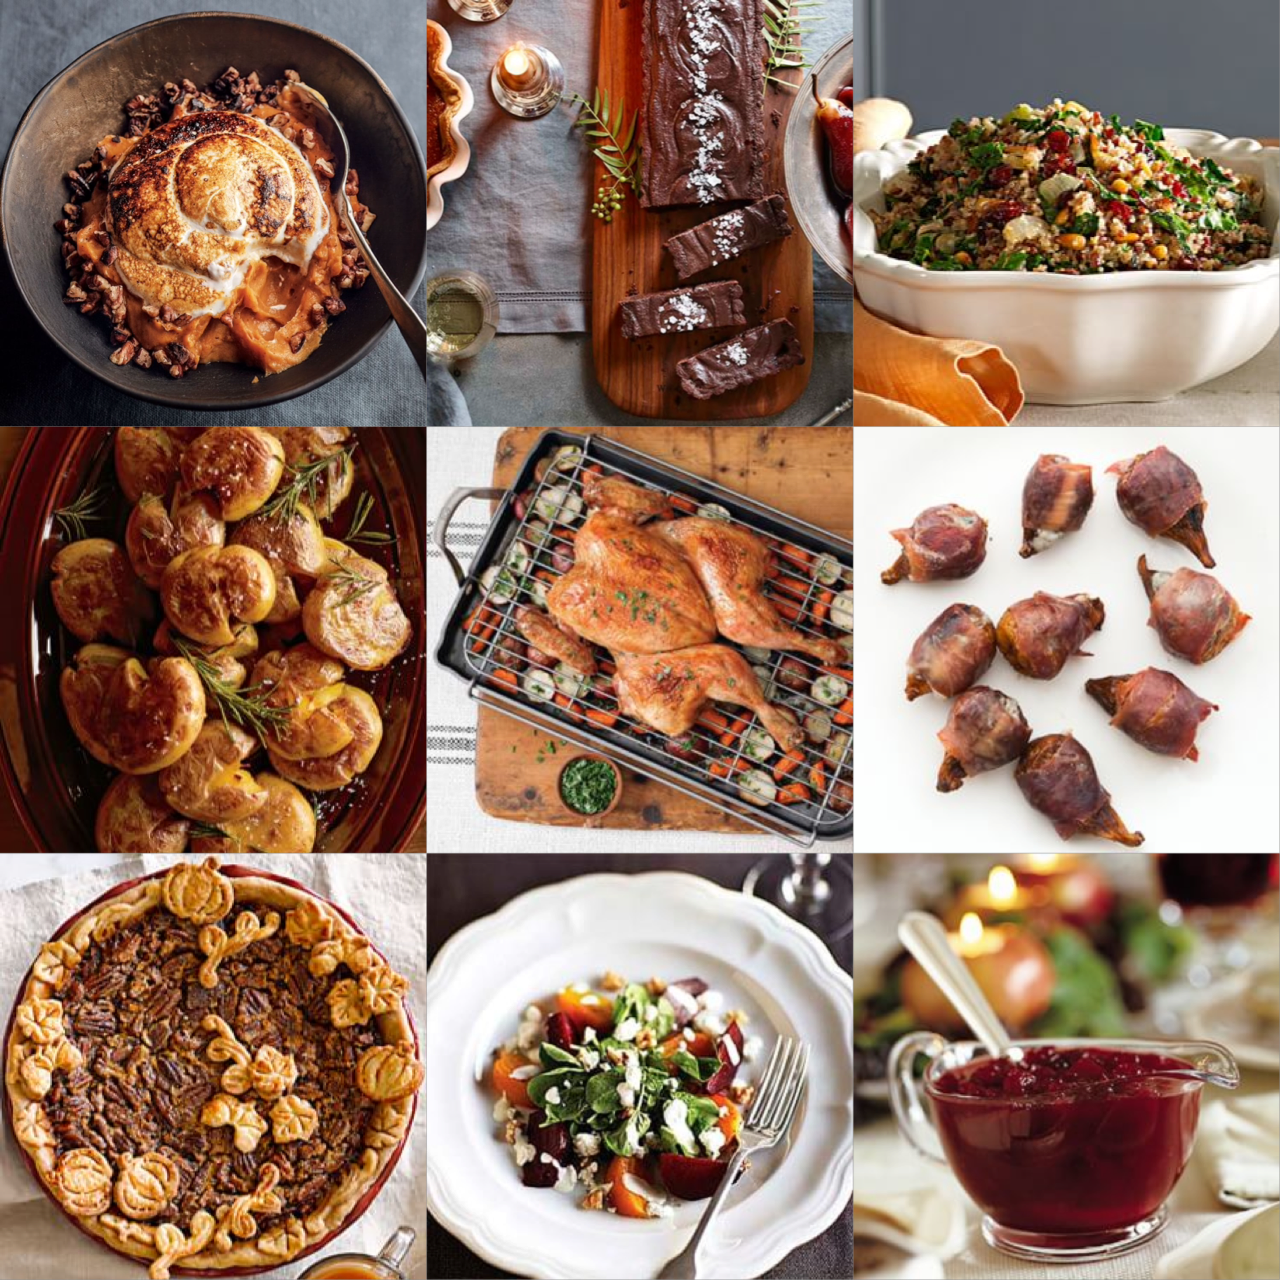 All images linked below and sourced from Williams-Sonoma.